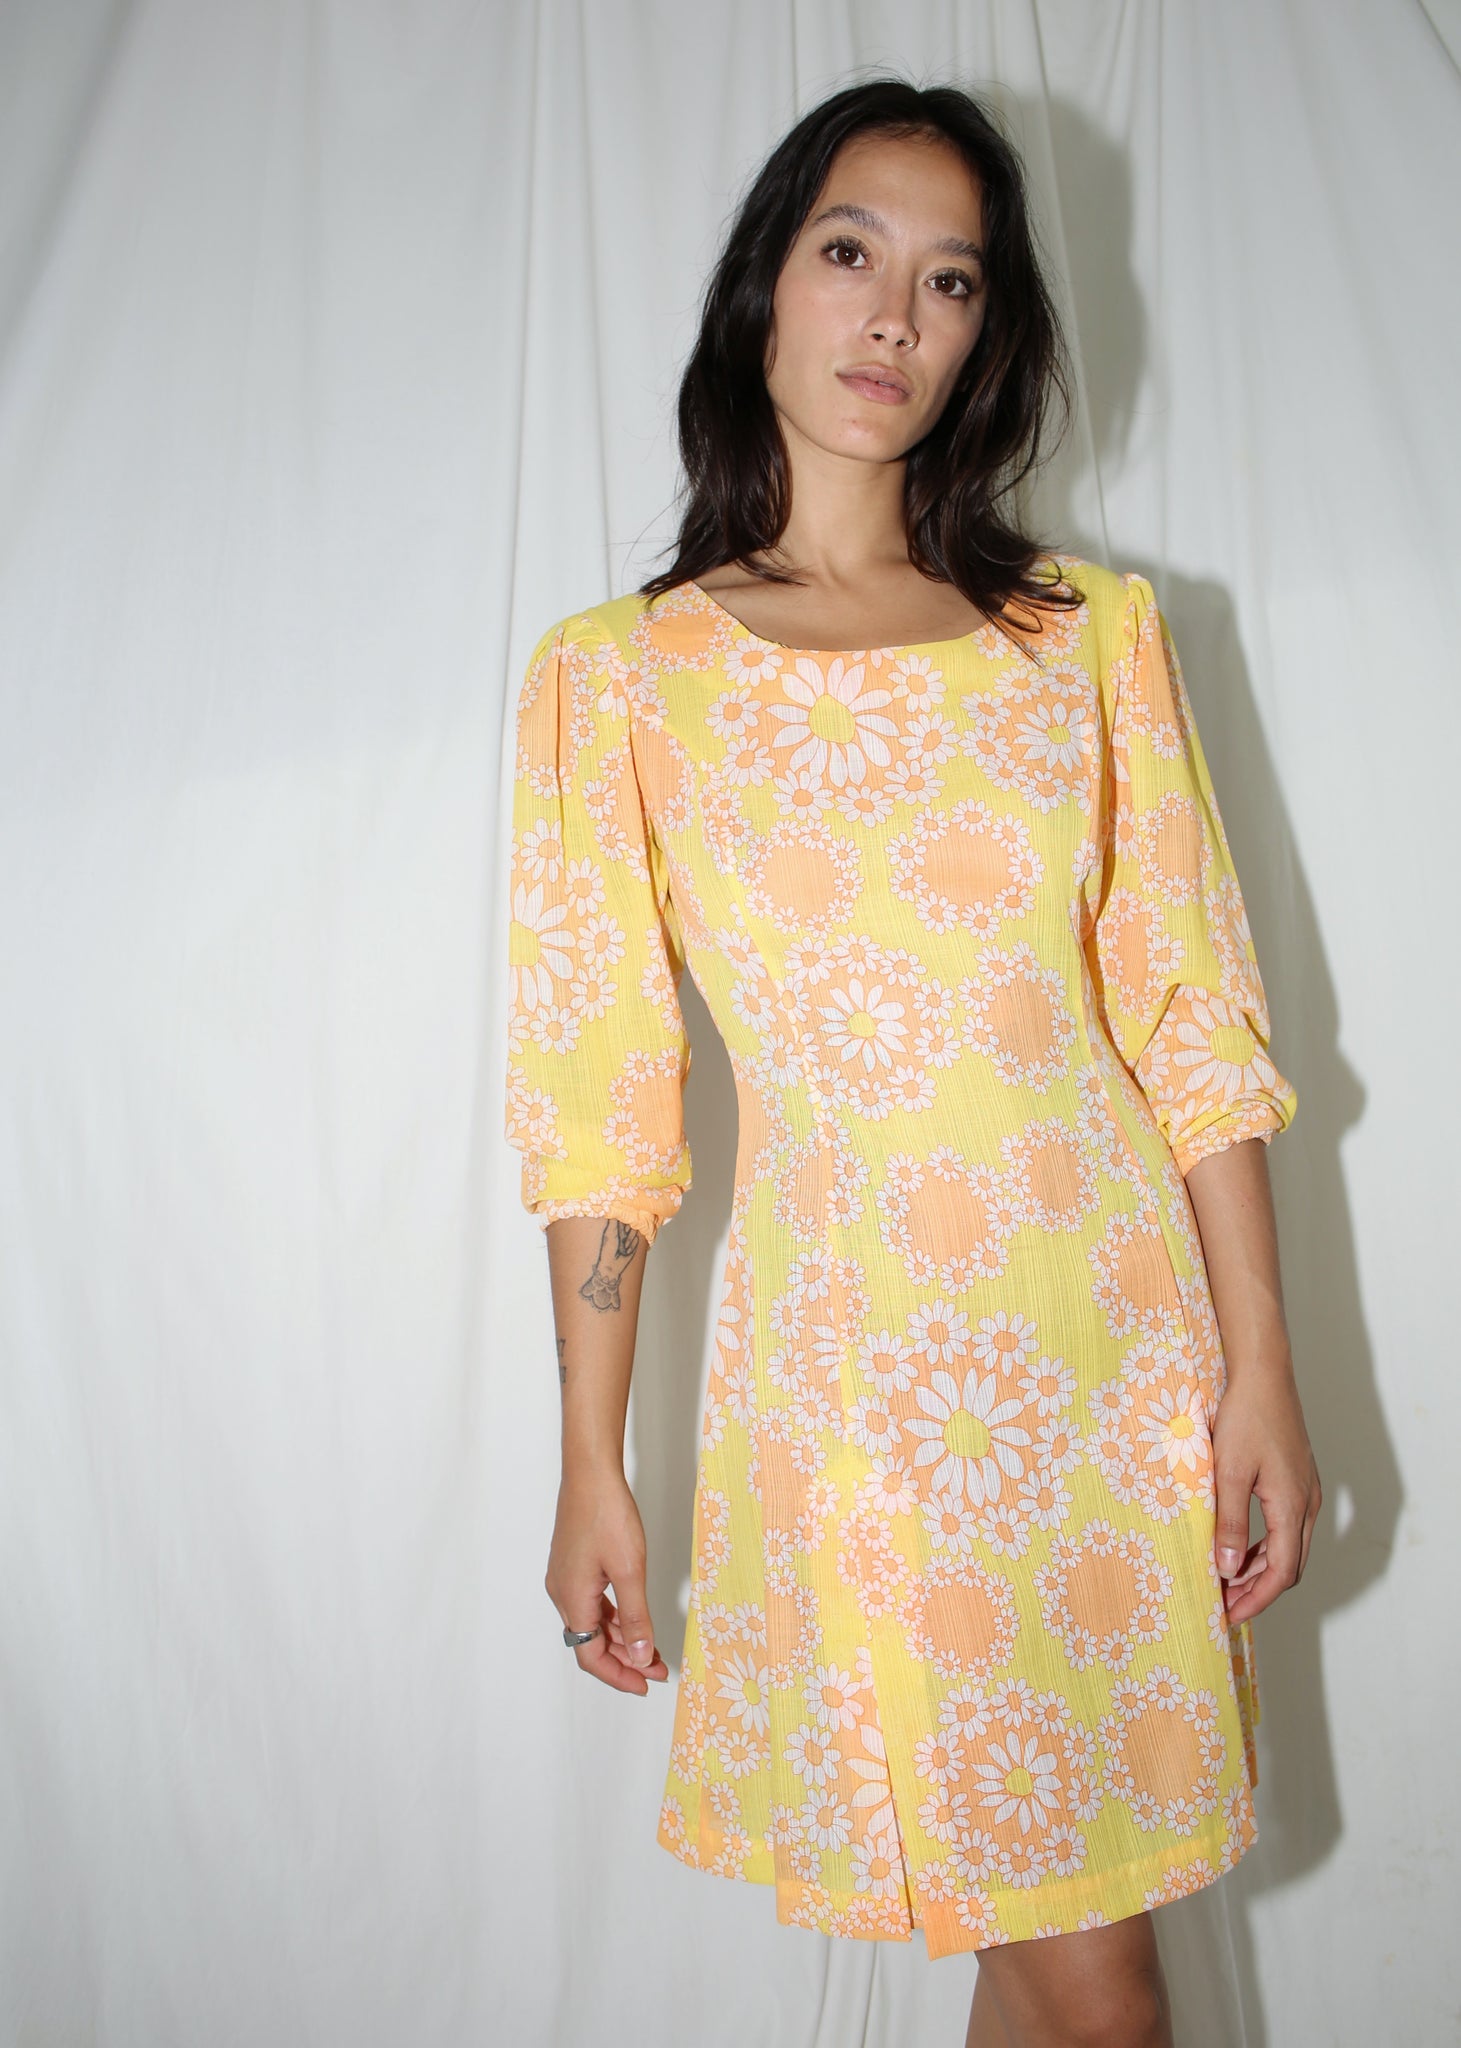 VINTAGE 60's YELLOW FLORAL PUFF SLEEVE DRESS (M)